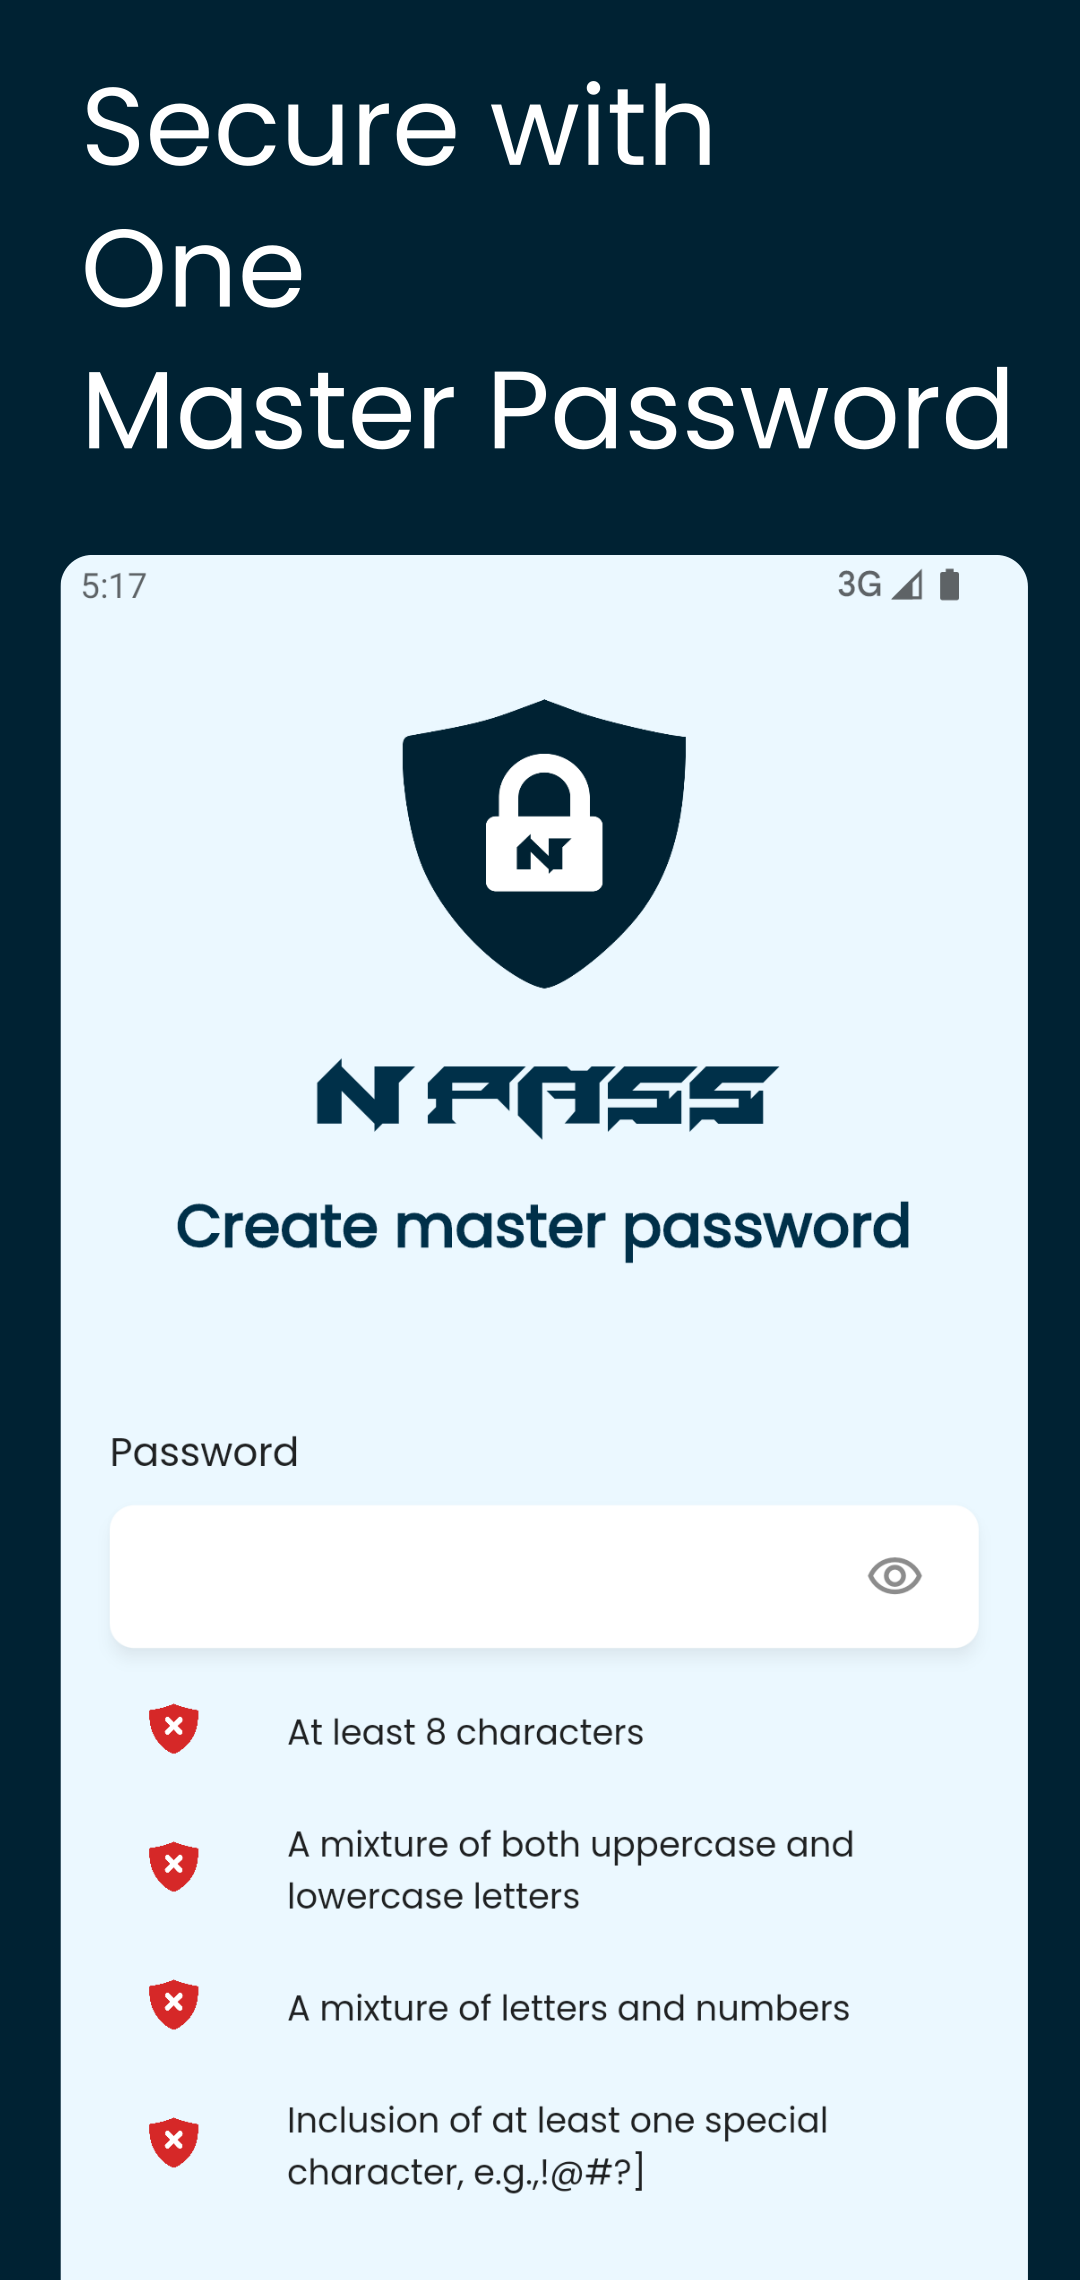 Secure with one master password